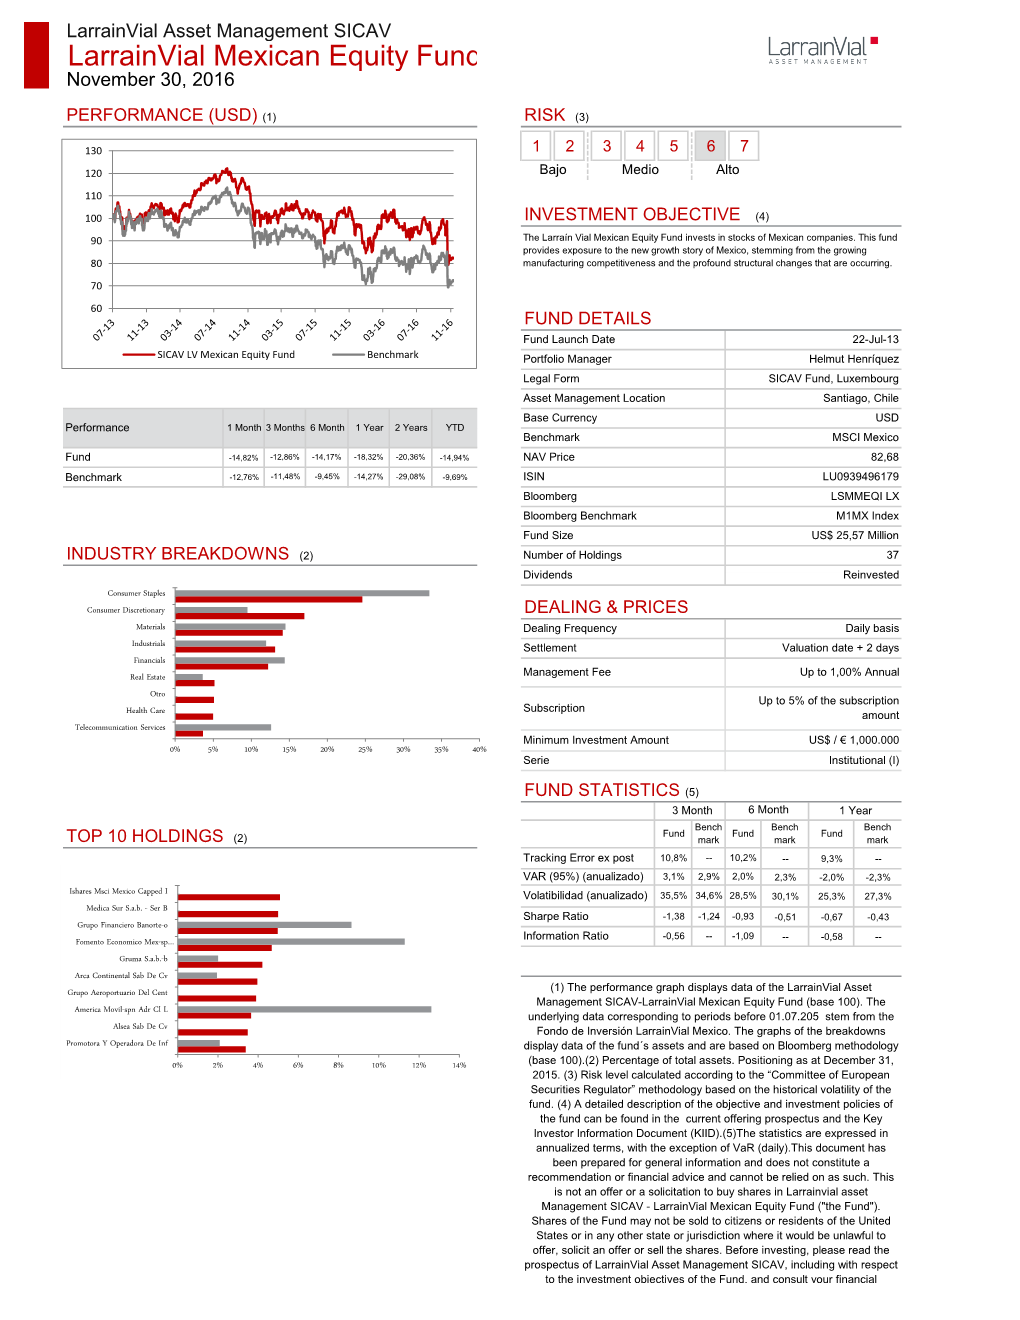 Larrainvial Mexican Equity Fund November 30, 2016